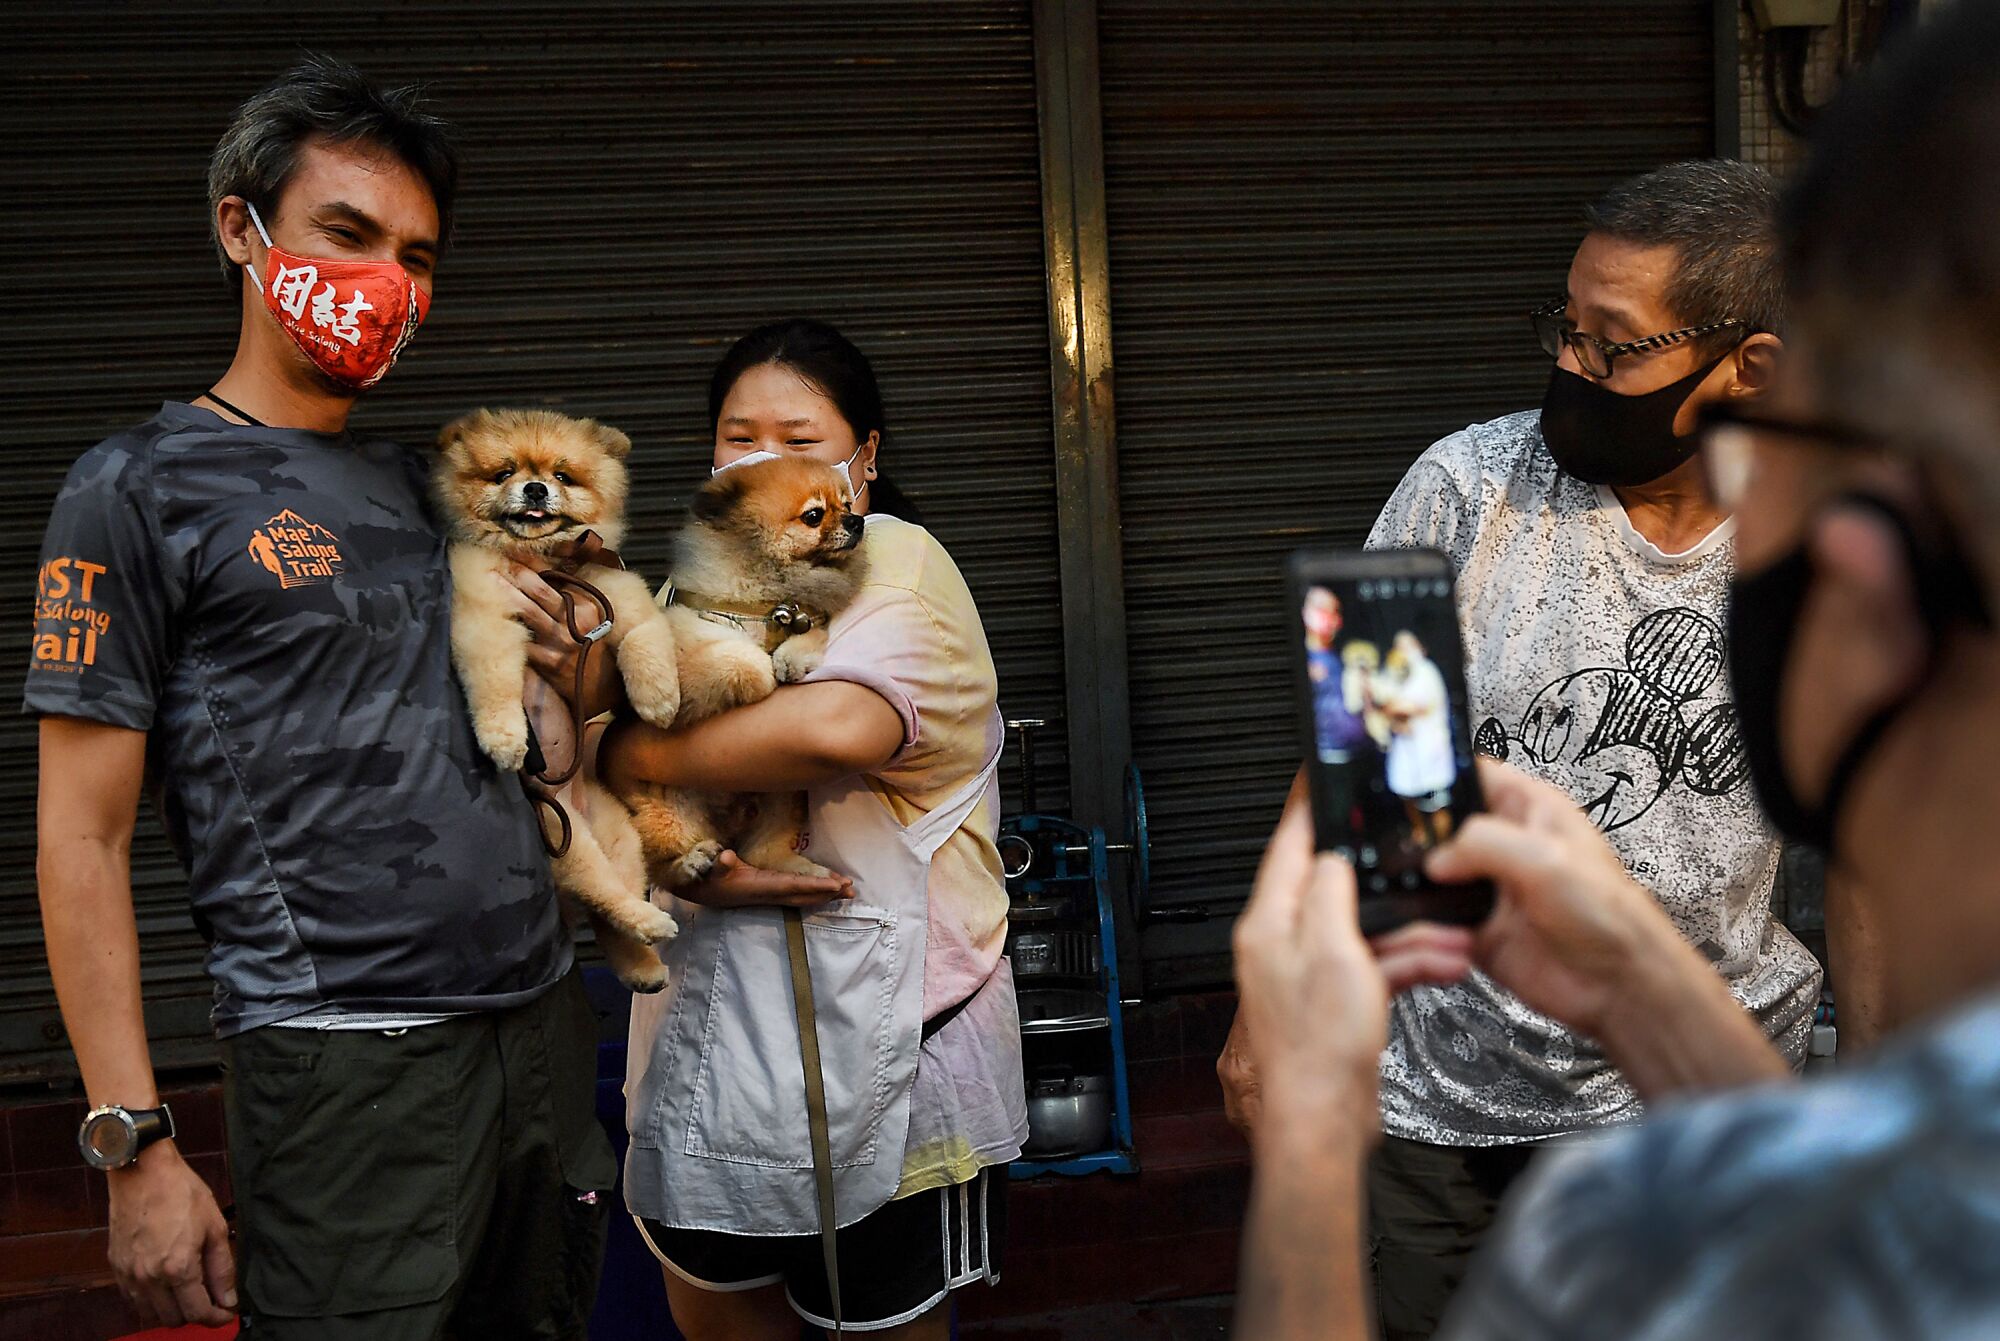 THAILAND: A street food vendor (C) and a customer (L) in face masks, as a preventive measure against the spread of the COVID-19 coronavirus, have their photo taken with their dogs in Chinatown in Bangkok on April 17, 2020.